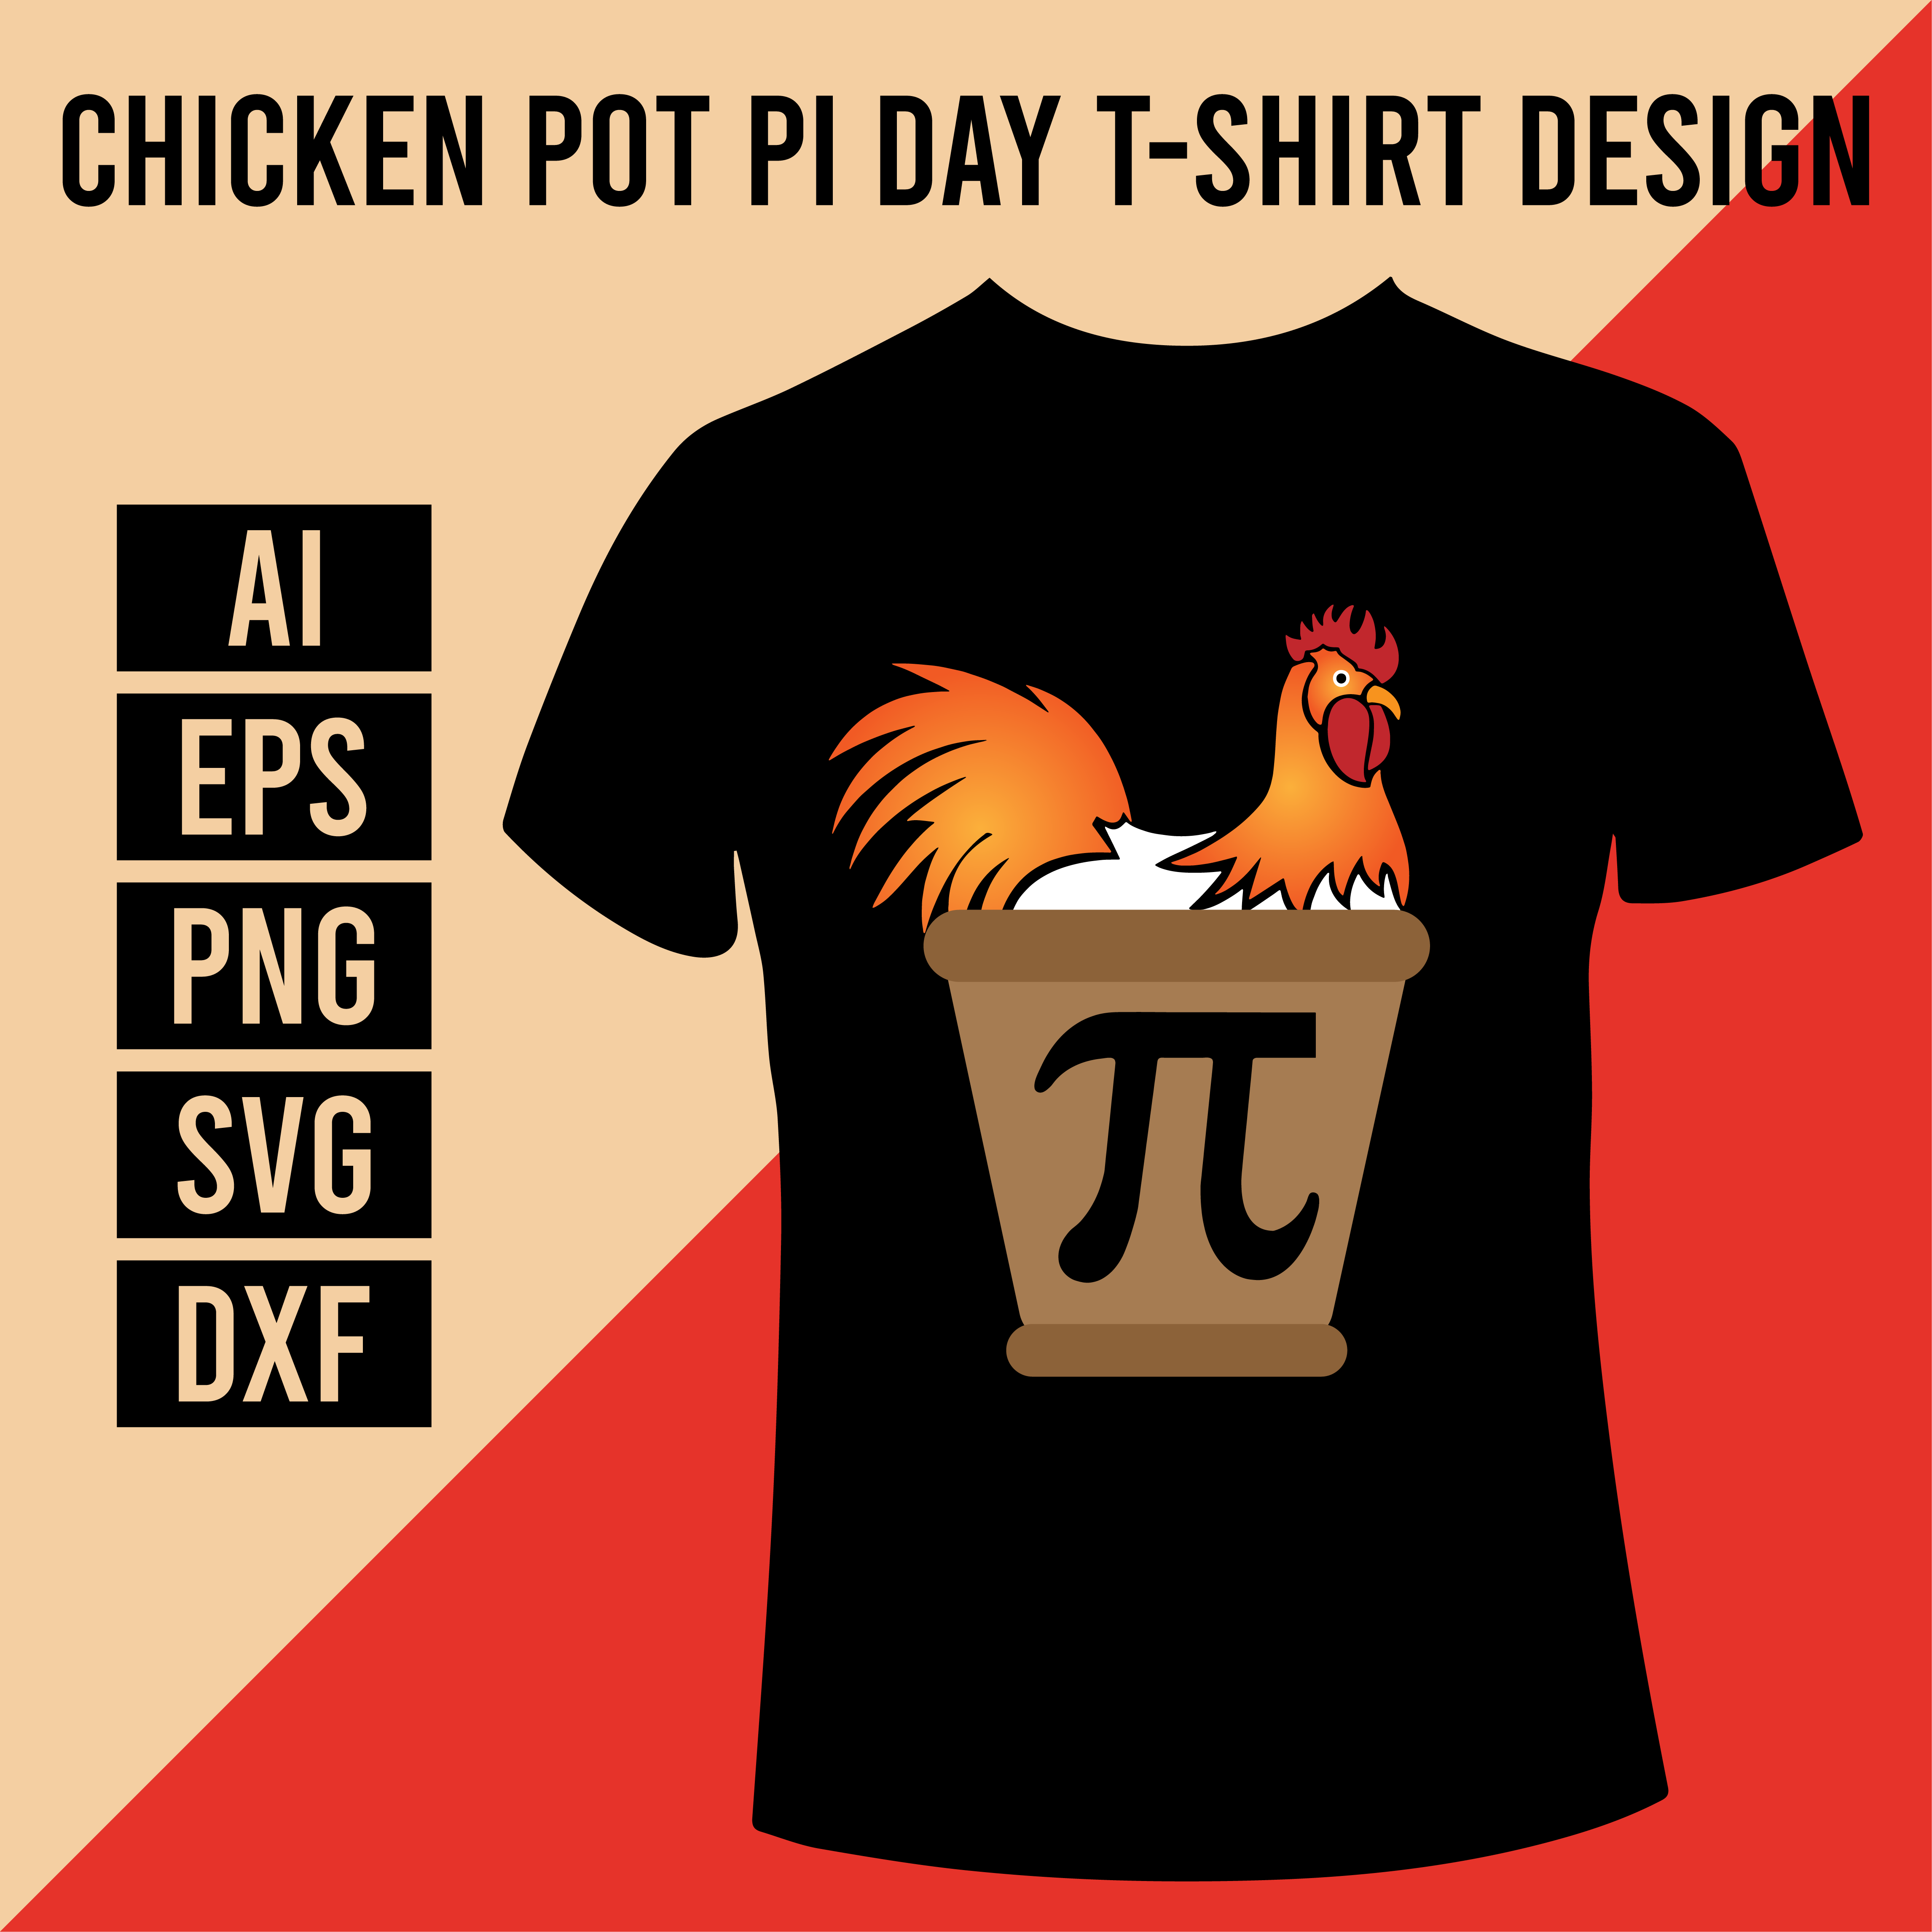 Chicken Pot PI Day T-Shirt Design cover image.